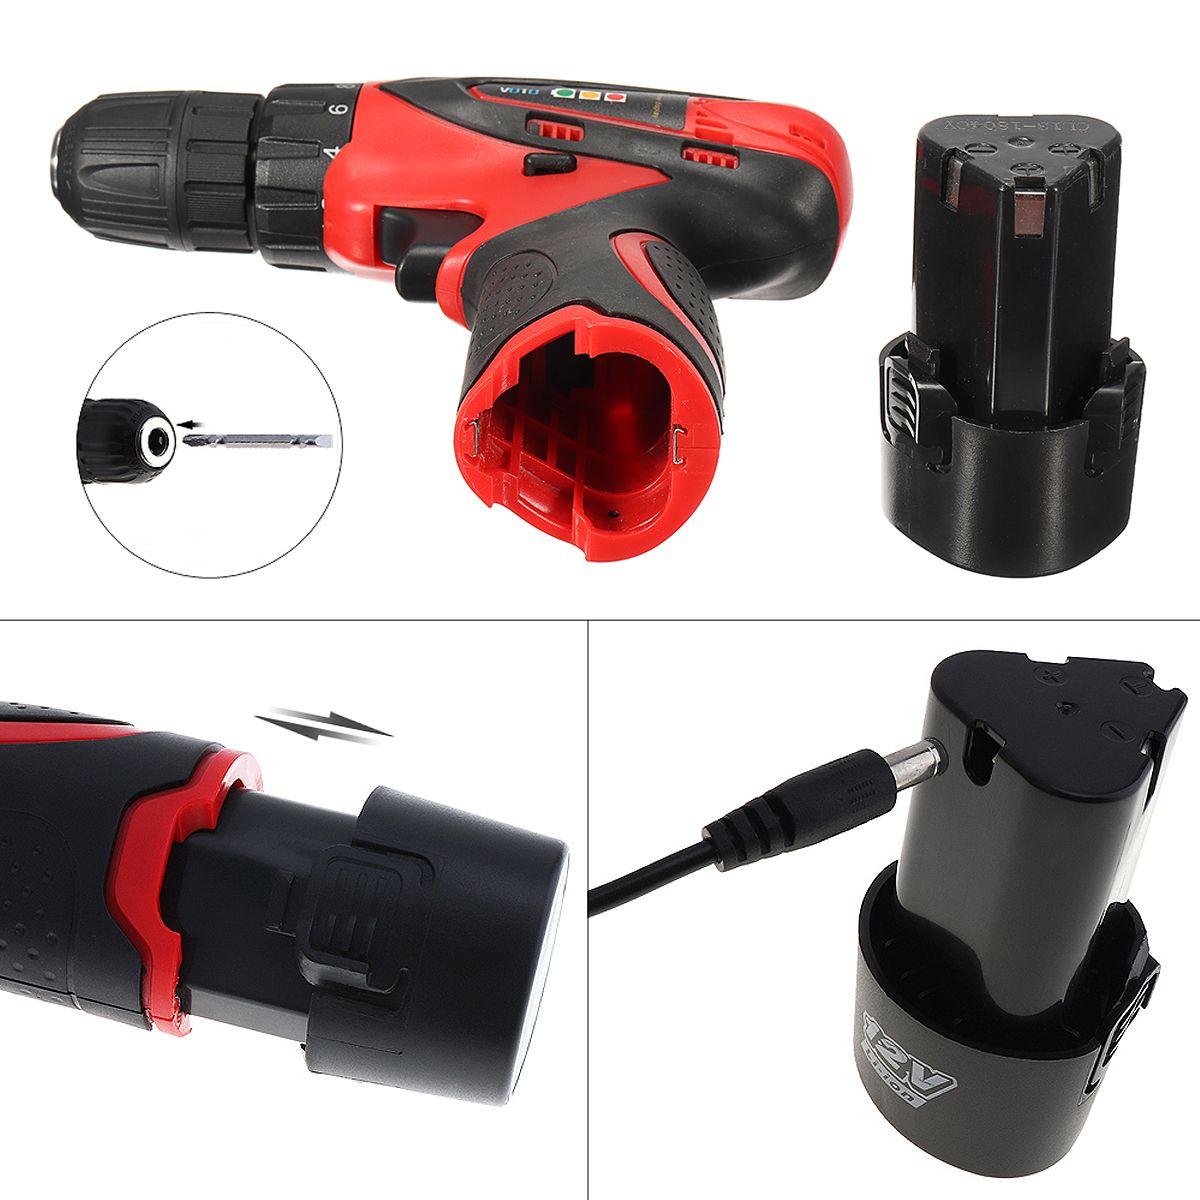 DC-12V-Power-Drills-Two-Speed-Electric-Screwdriver-2-Batteries-1-Charger-Screw-Driver-Tools-Kit-1288364